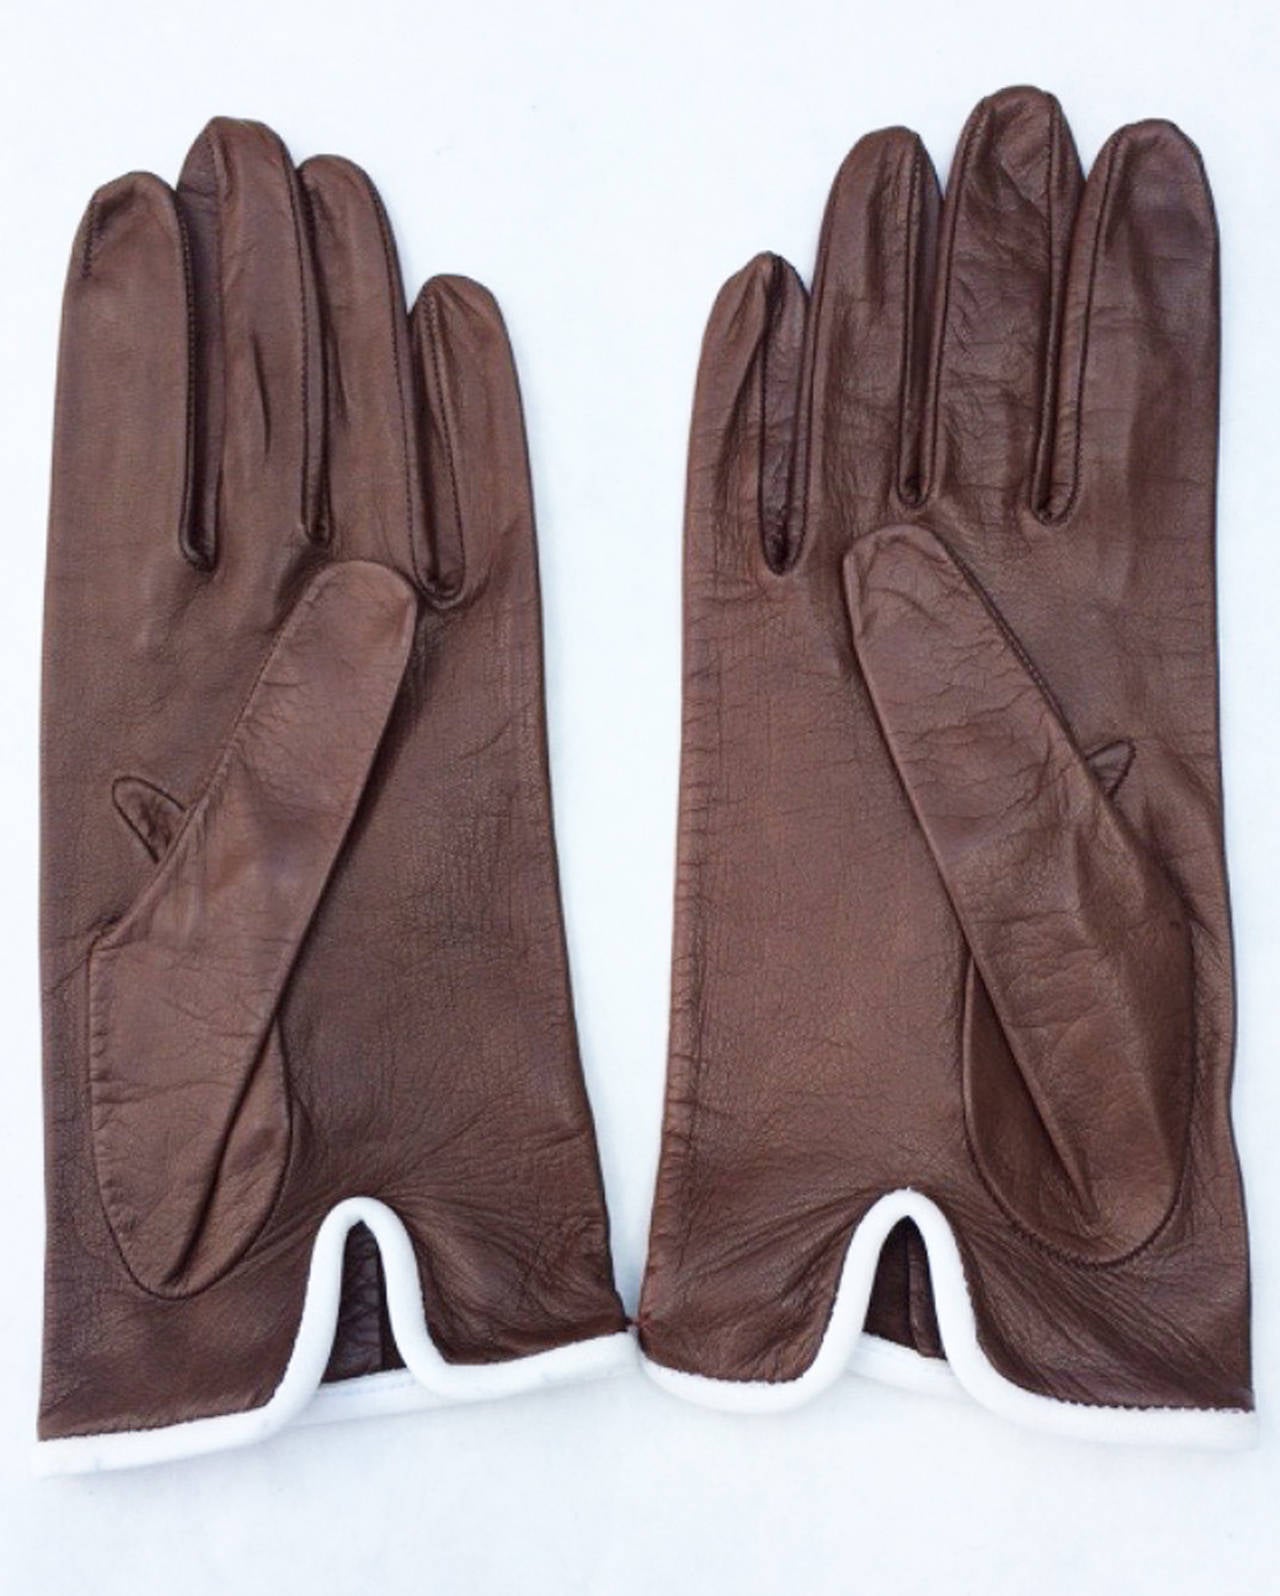 A fine vintage pair Giorgio Armani leather driving gloves. Supple brown dyed calf leather items trimmed in white calf and fully lined. Size 7. Pristine unworn.